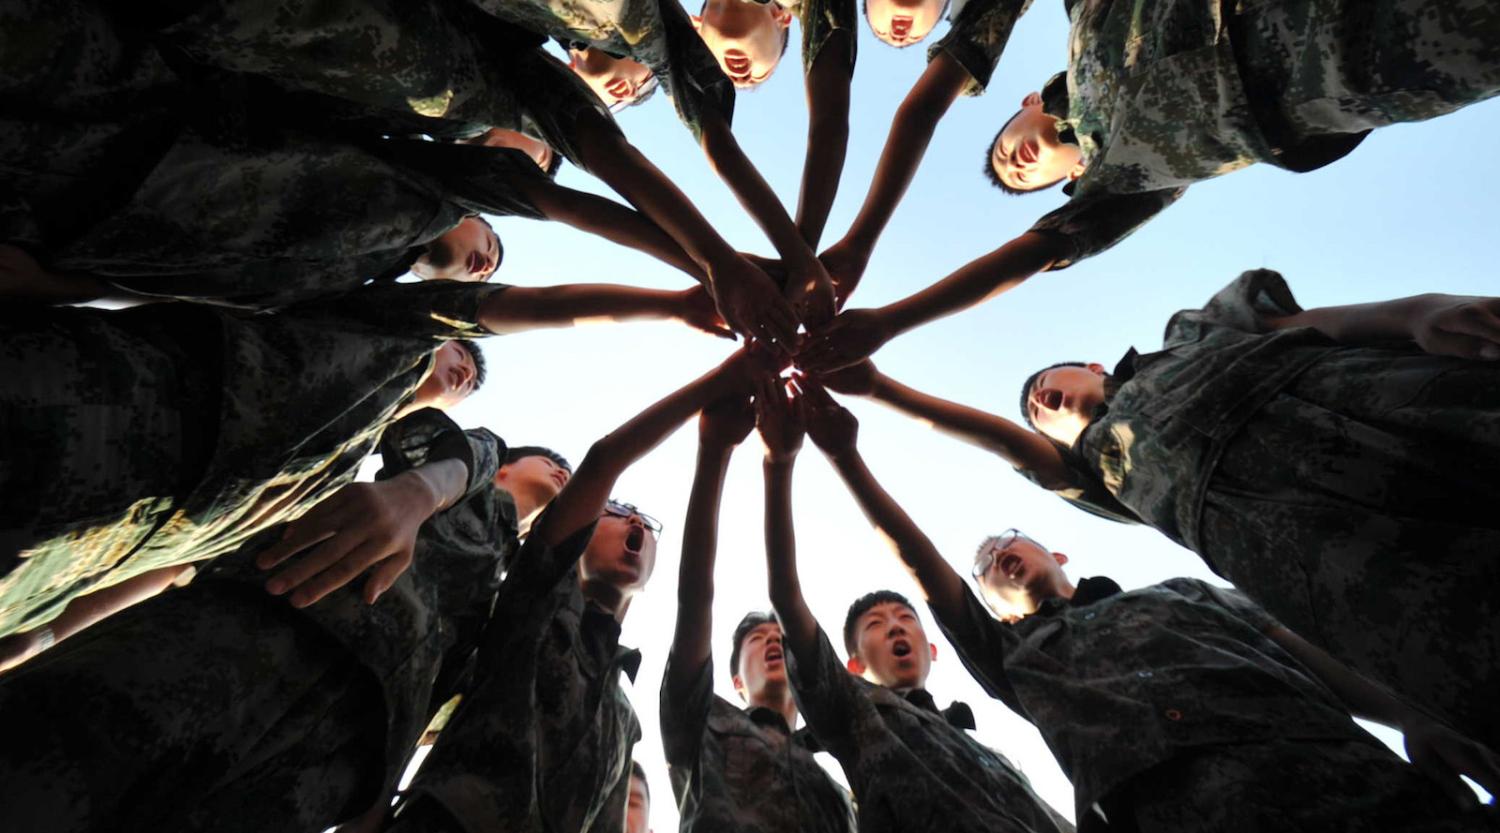 High school students cheer at a military camp in Shanxi Province, China (Photo: VCG via Getty)